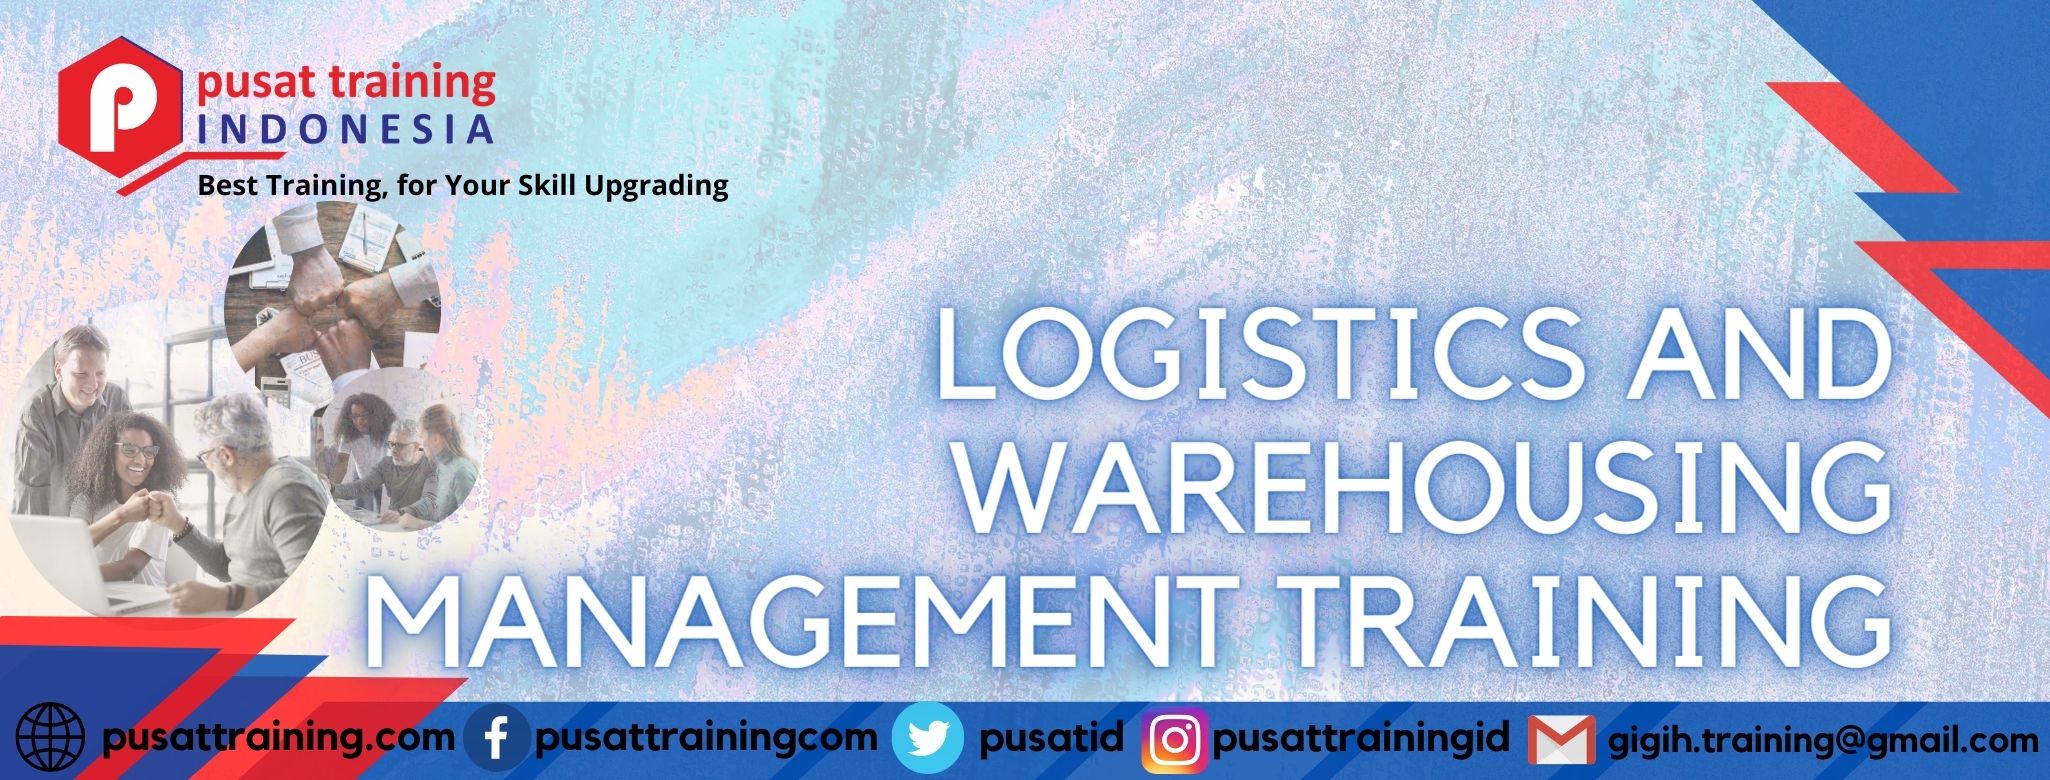 logistic-and-warehousing-management